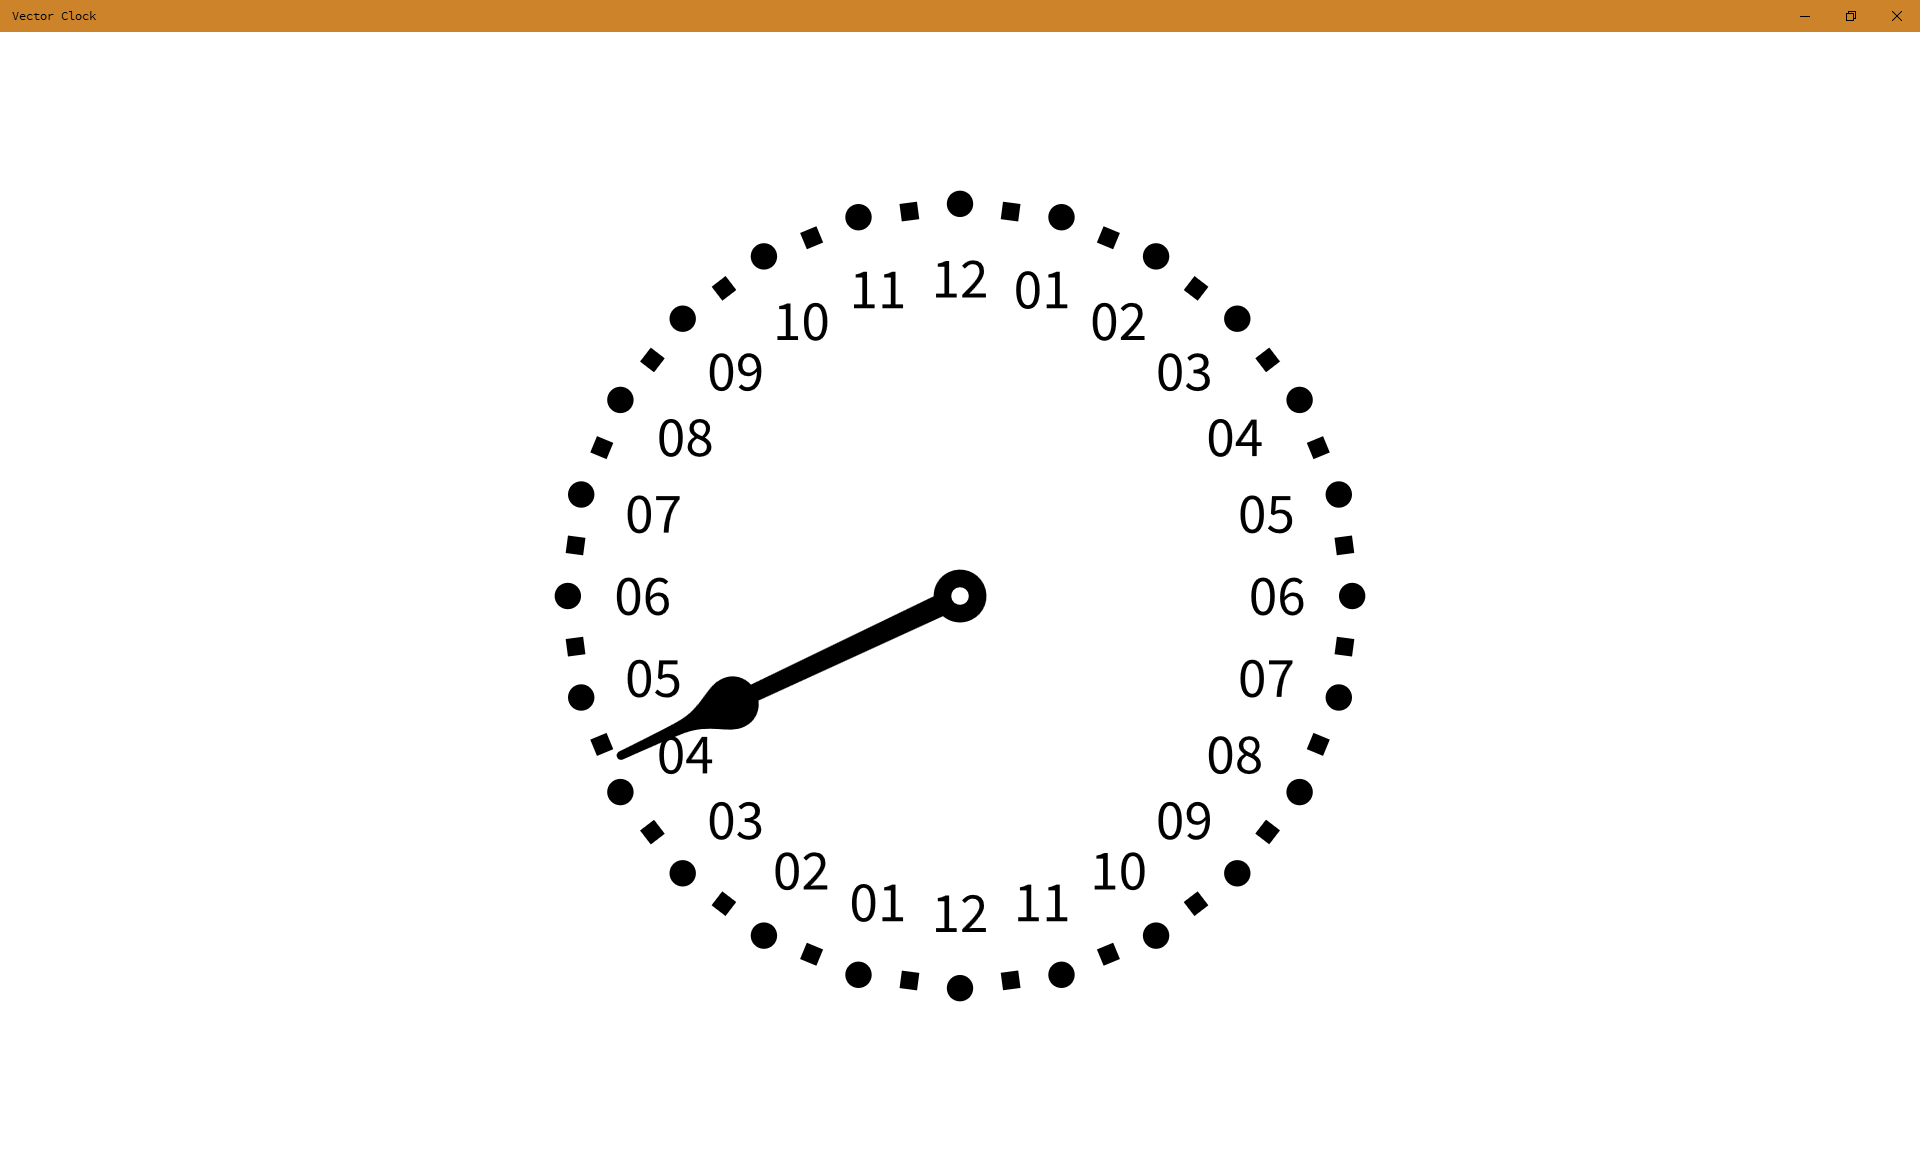 A quick custom configuration with several clock elements turned off